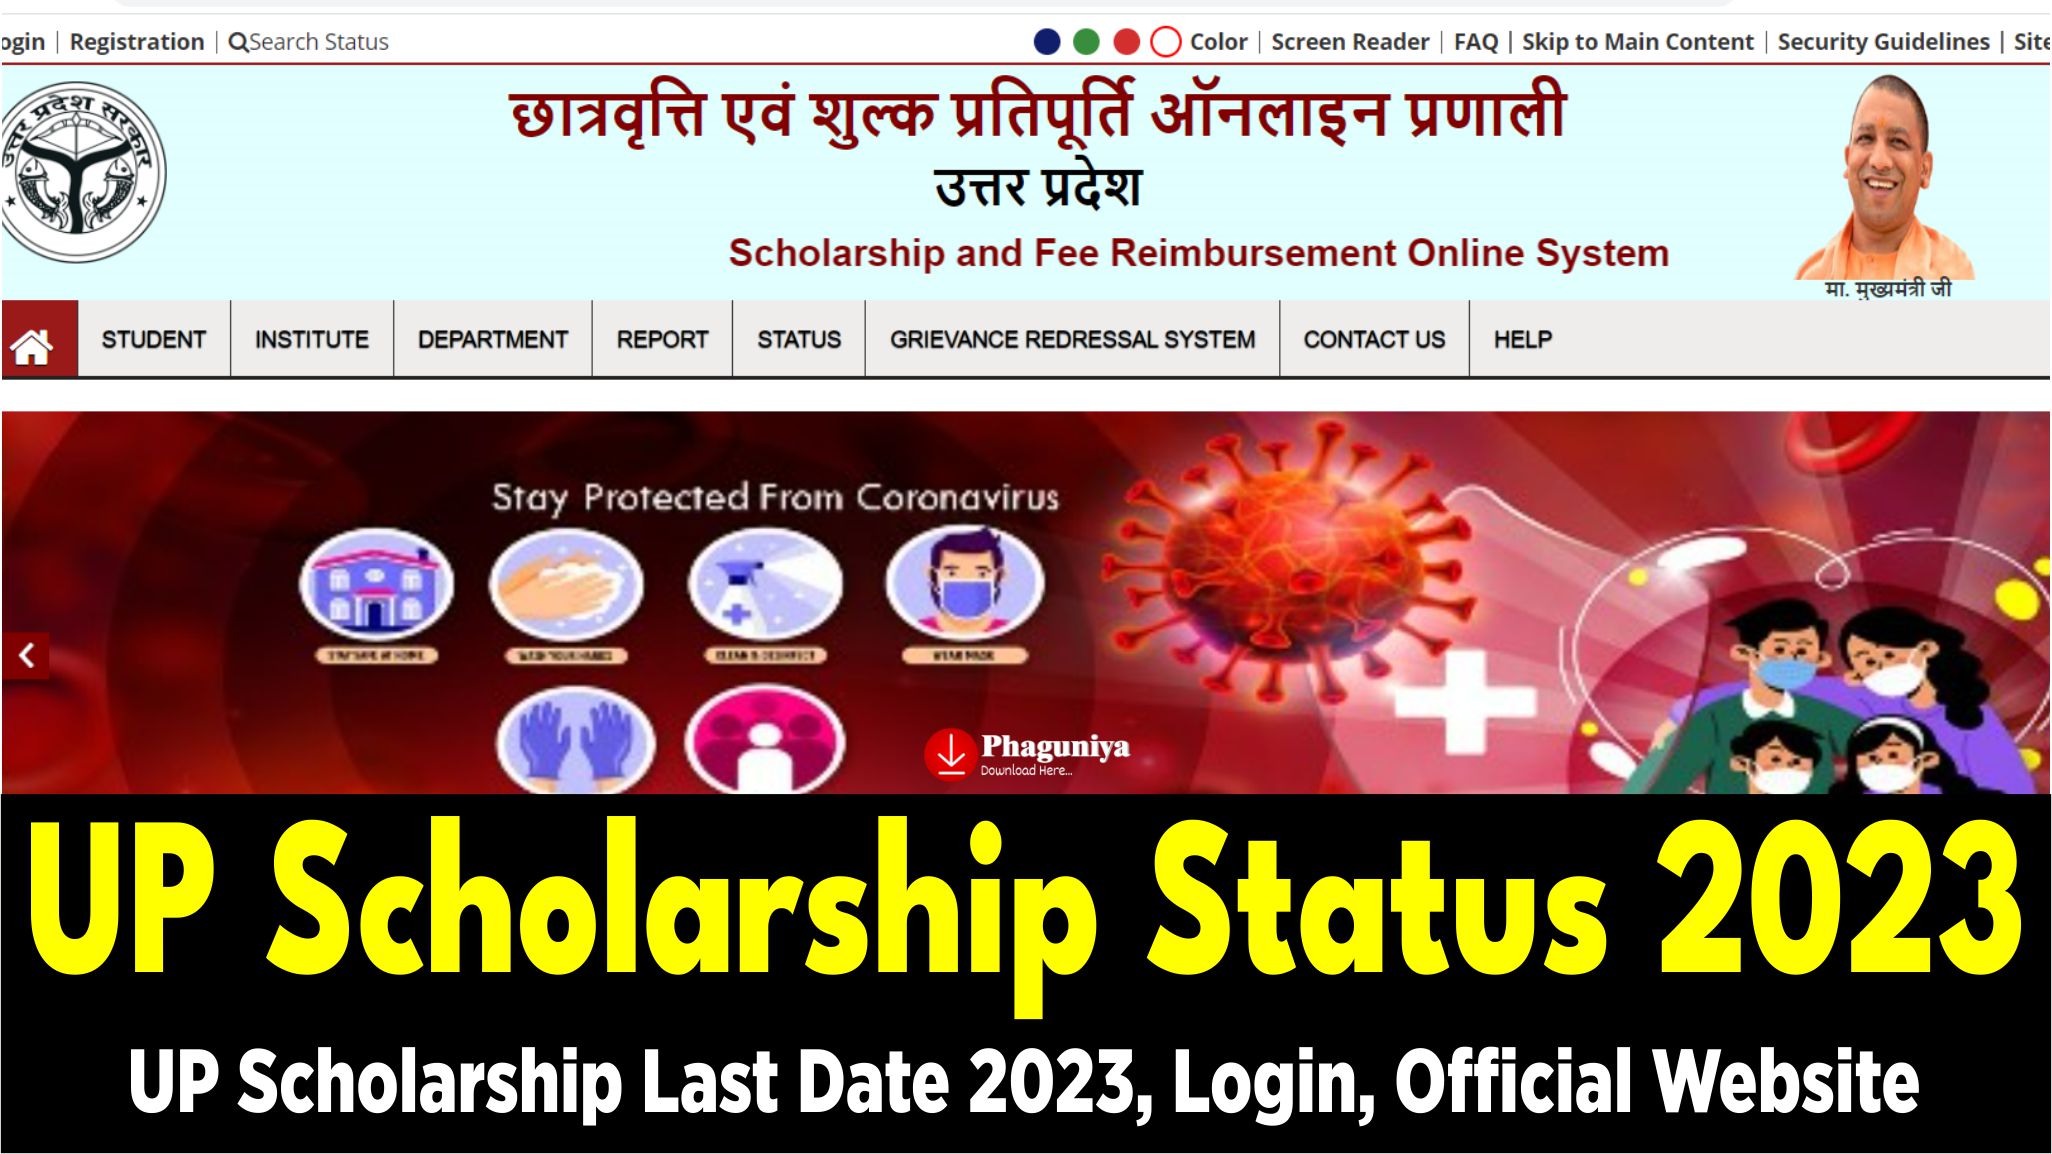 UP Scholarship Status 2023, UP Scholarship Last Date, UP Scholarship Login, UP Scholarship Status, UP Scholarship Official Website